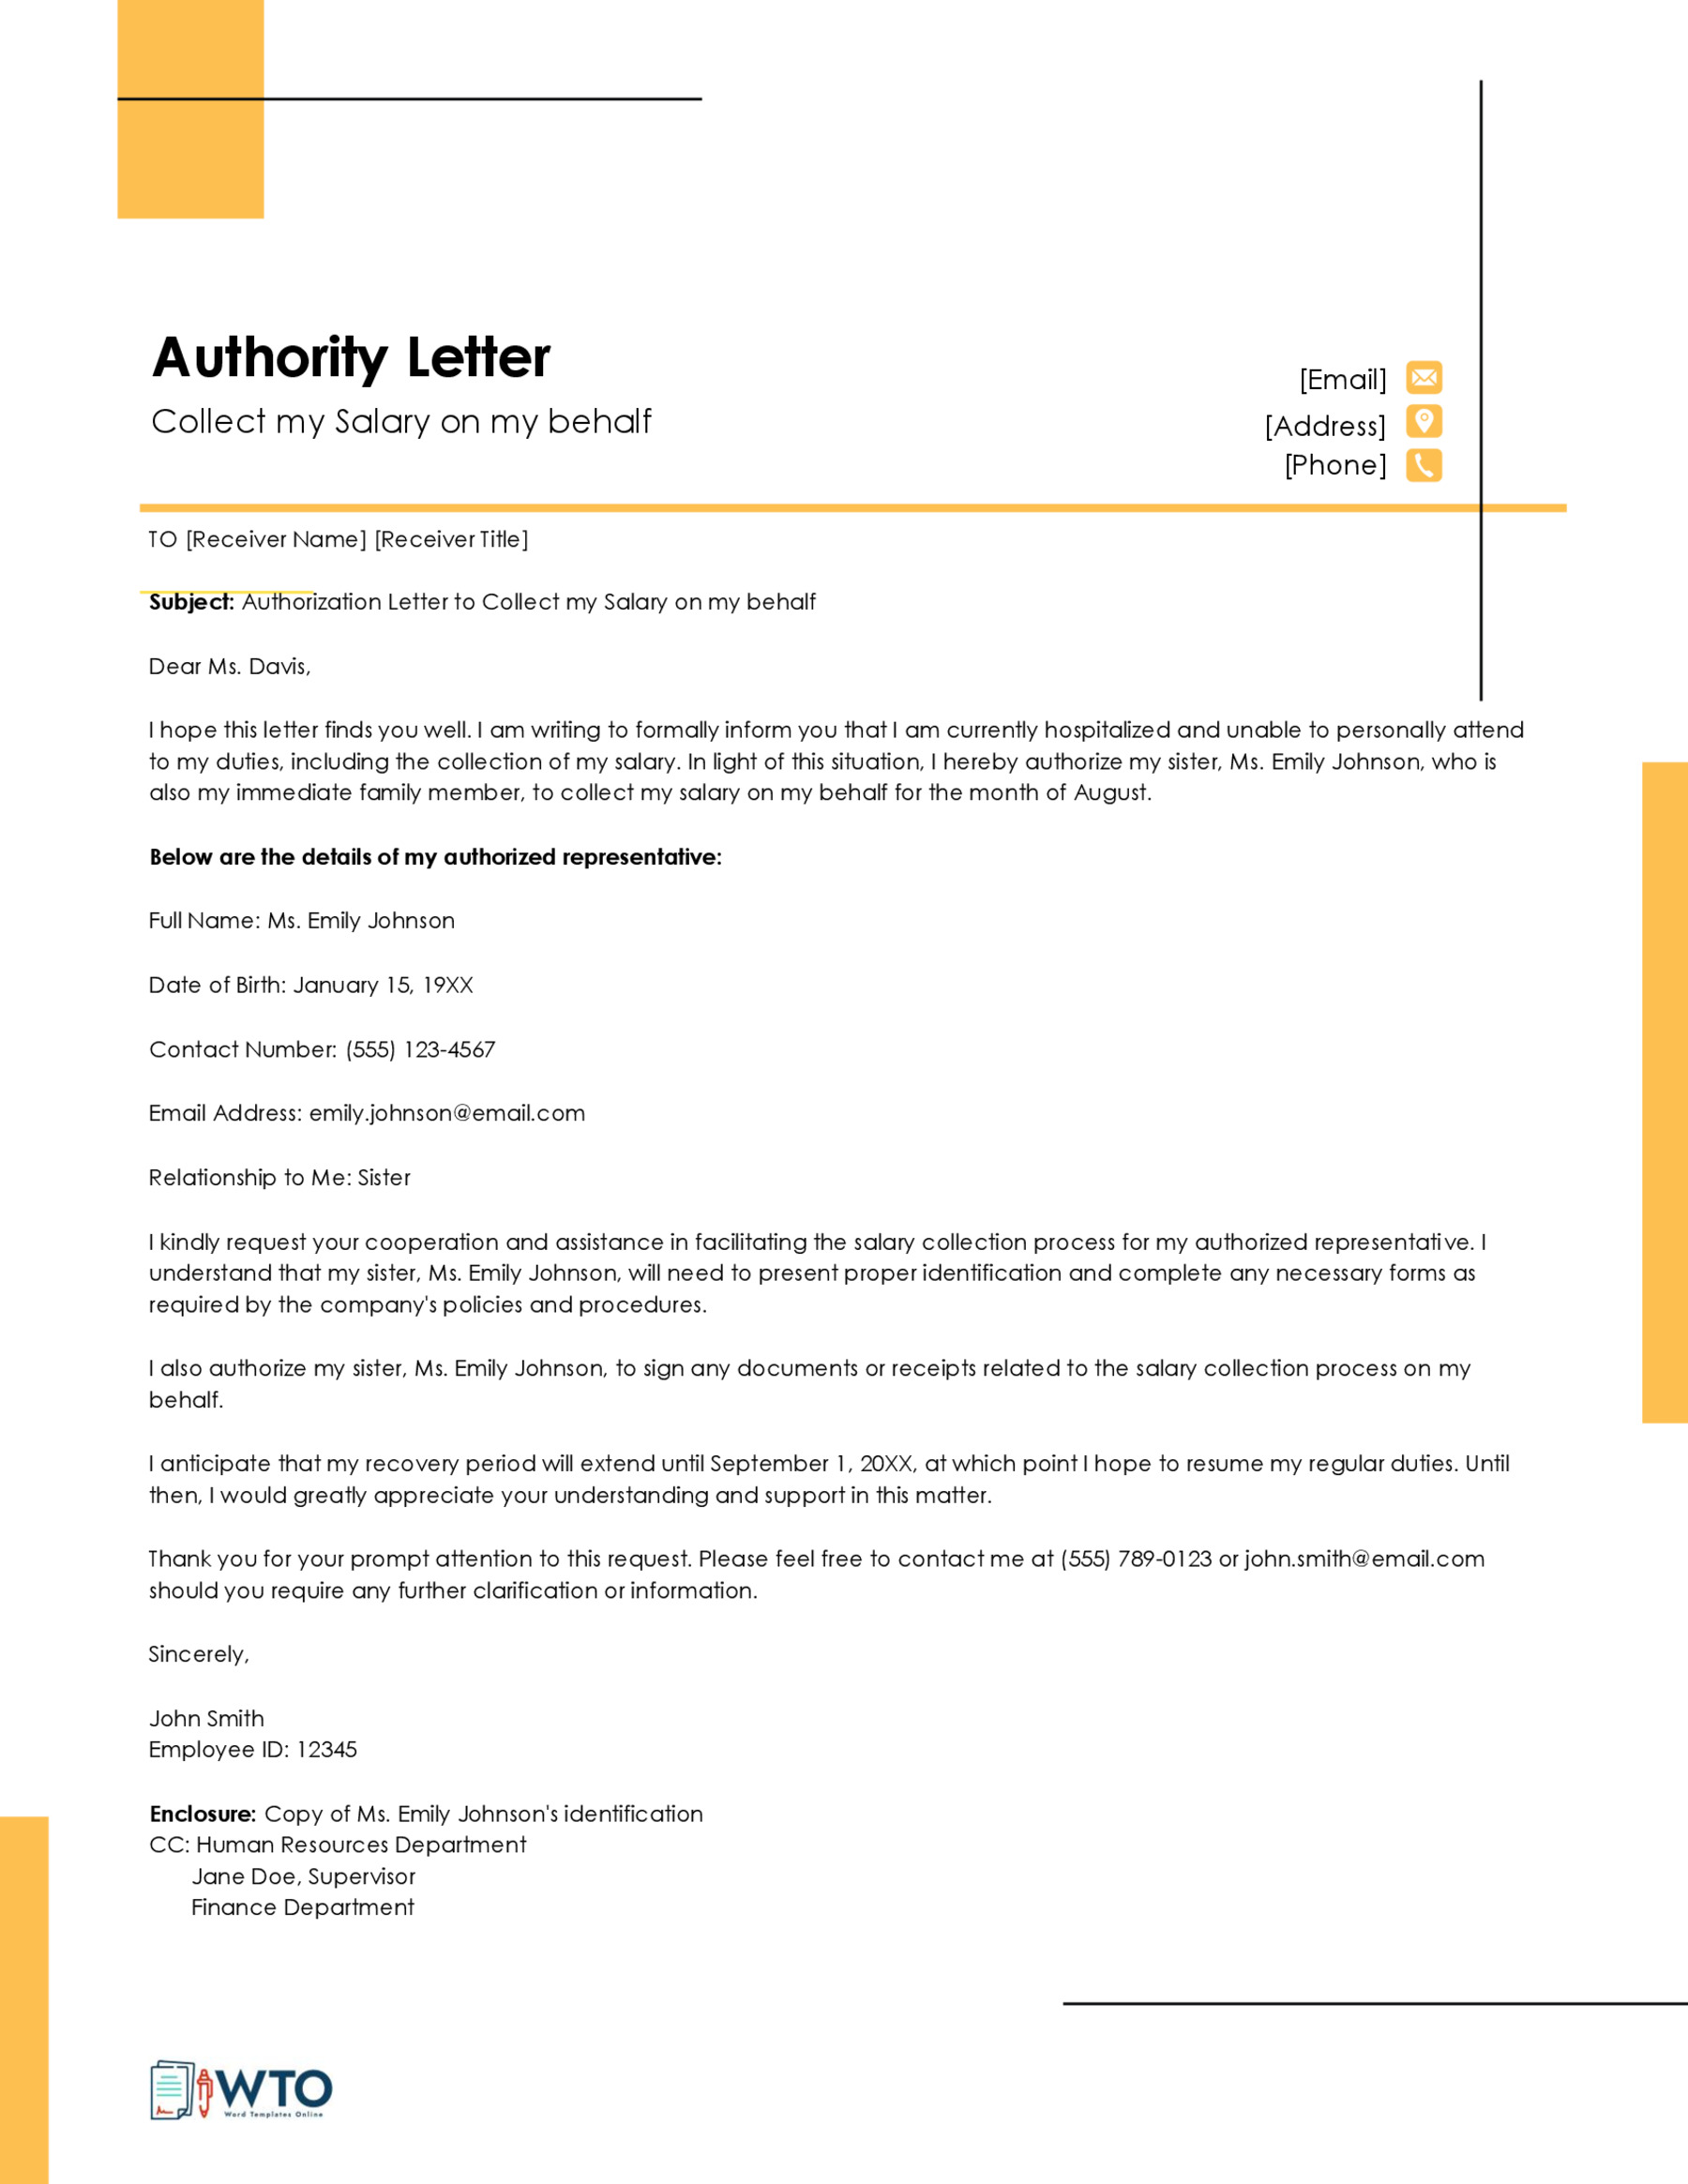 Sample Authorization Letter to Collect Salary-Word Format